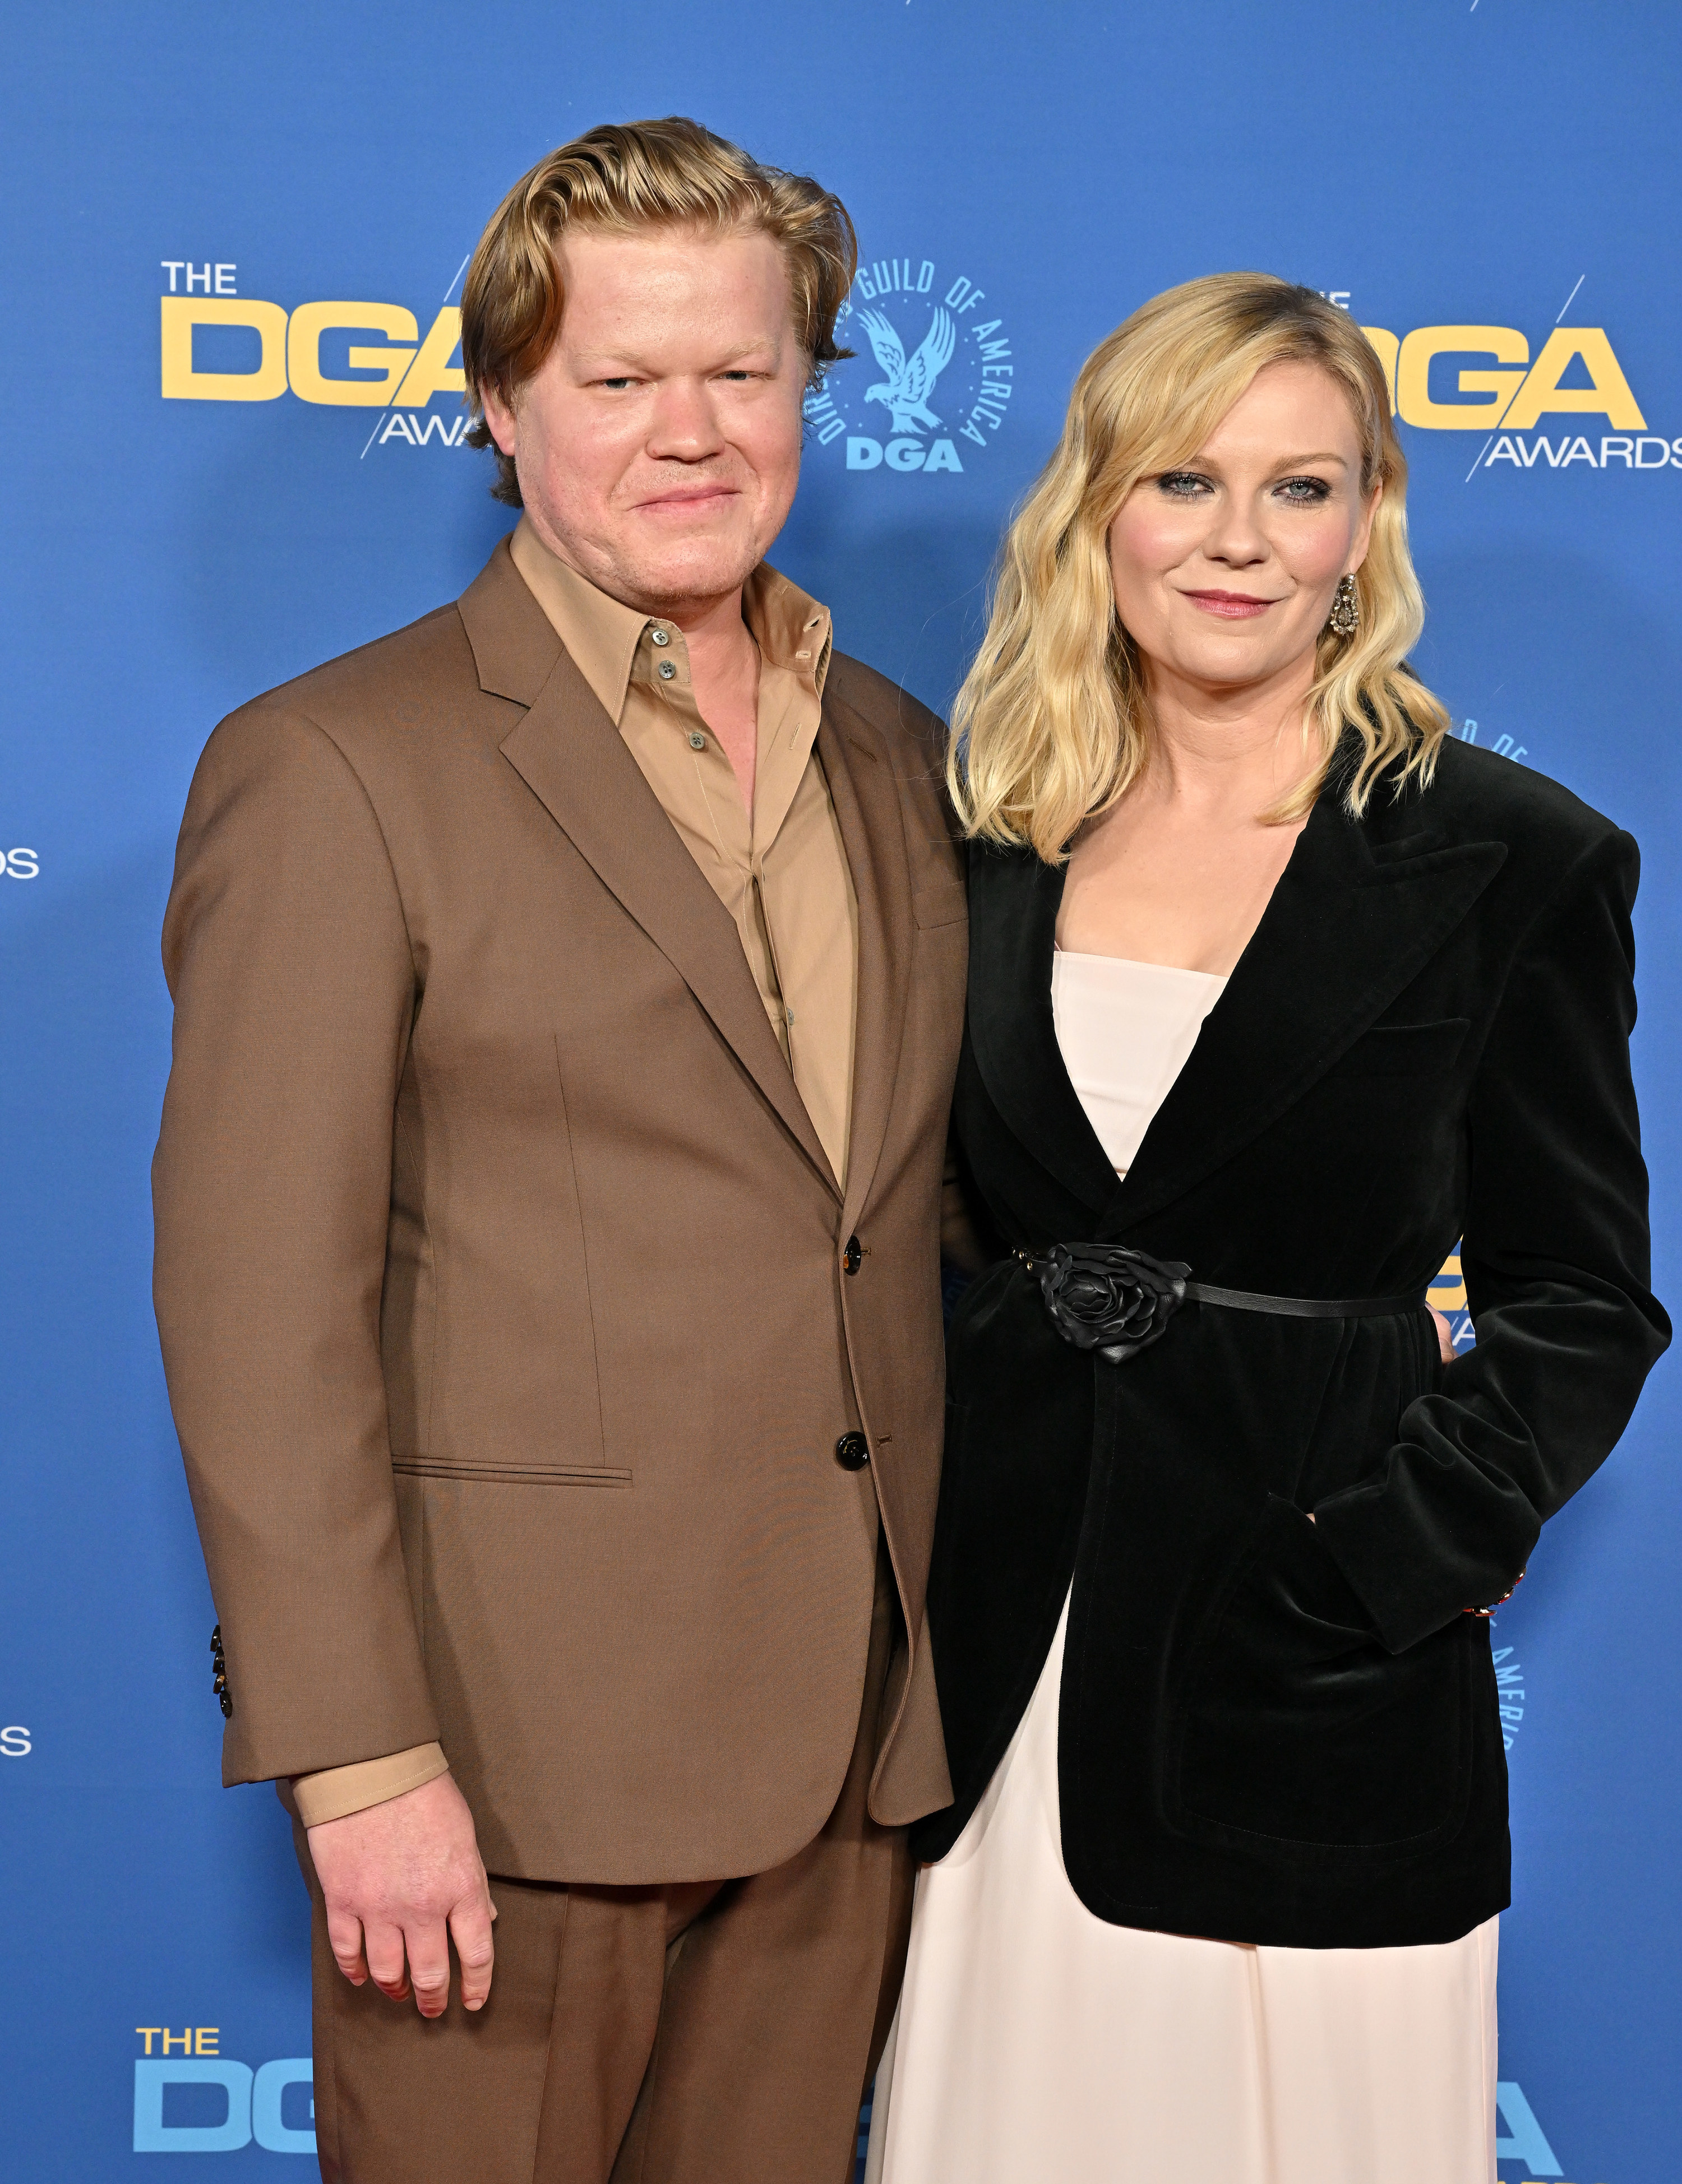 Jesse Plemons and Kirsten Dunst attend the 74th Annual Directors Guild of America Awards